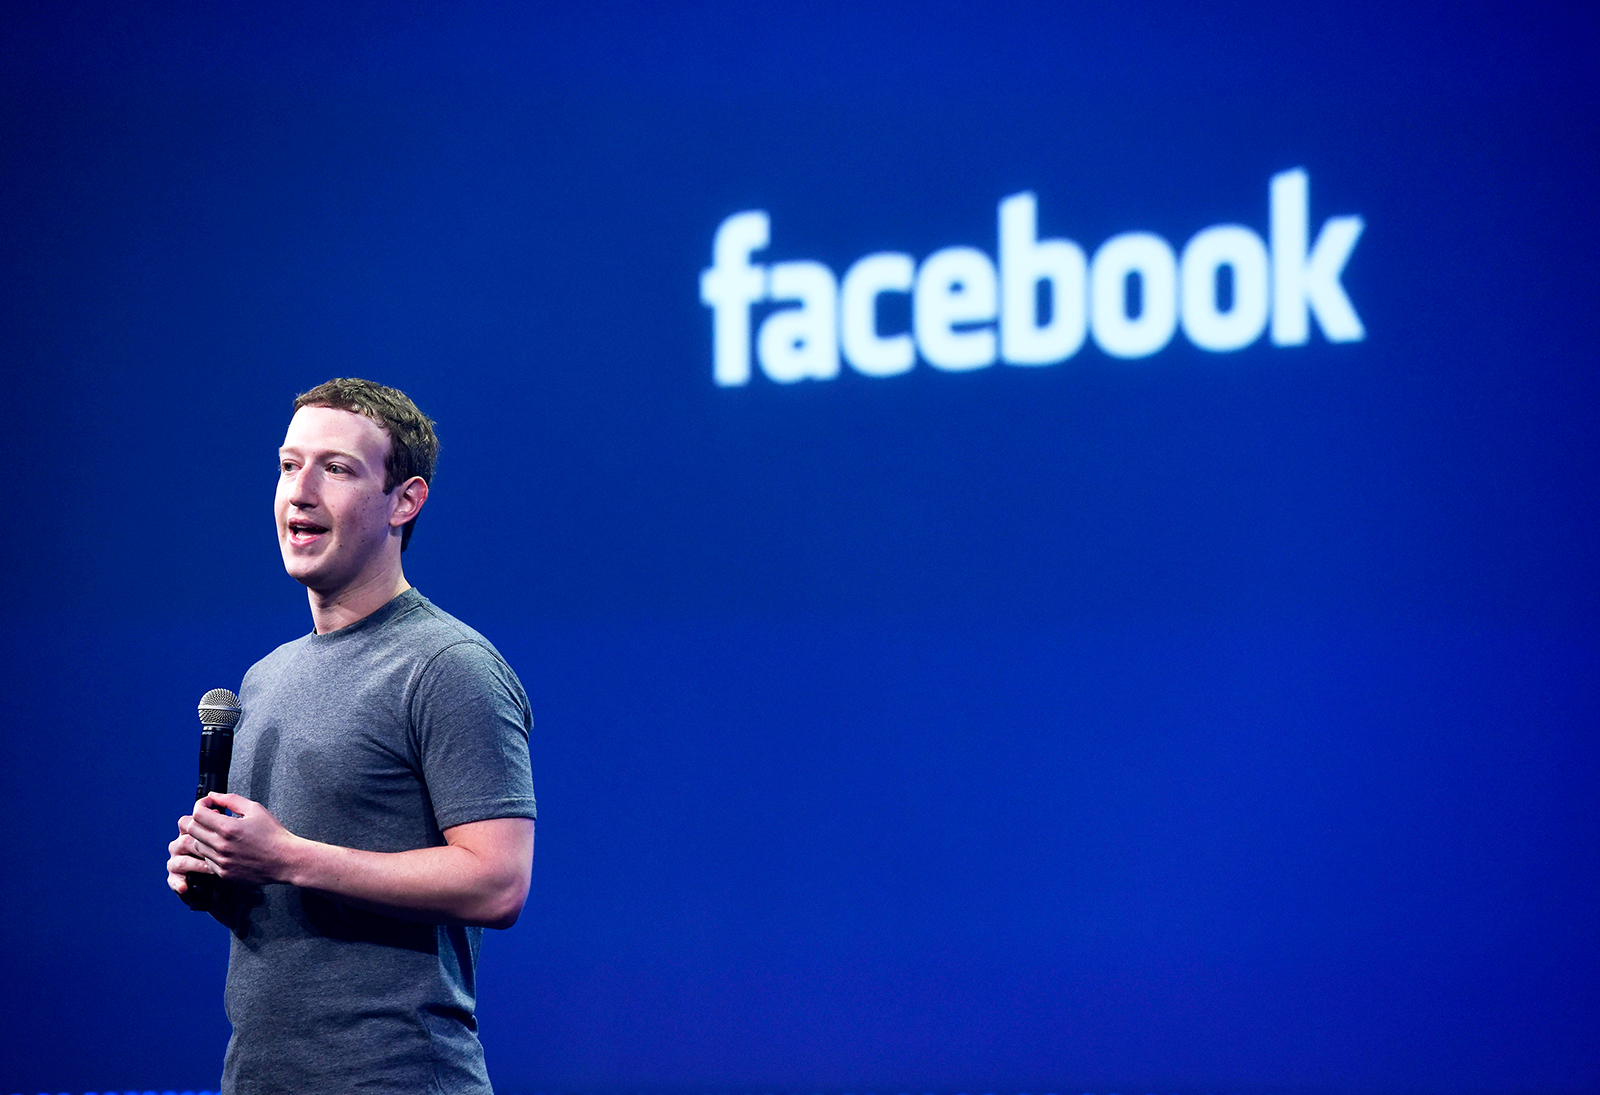 Facebook has signed a music licensing deal with European rights company ICE